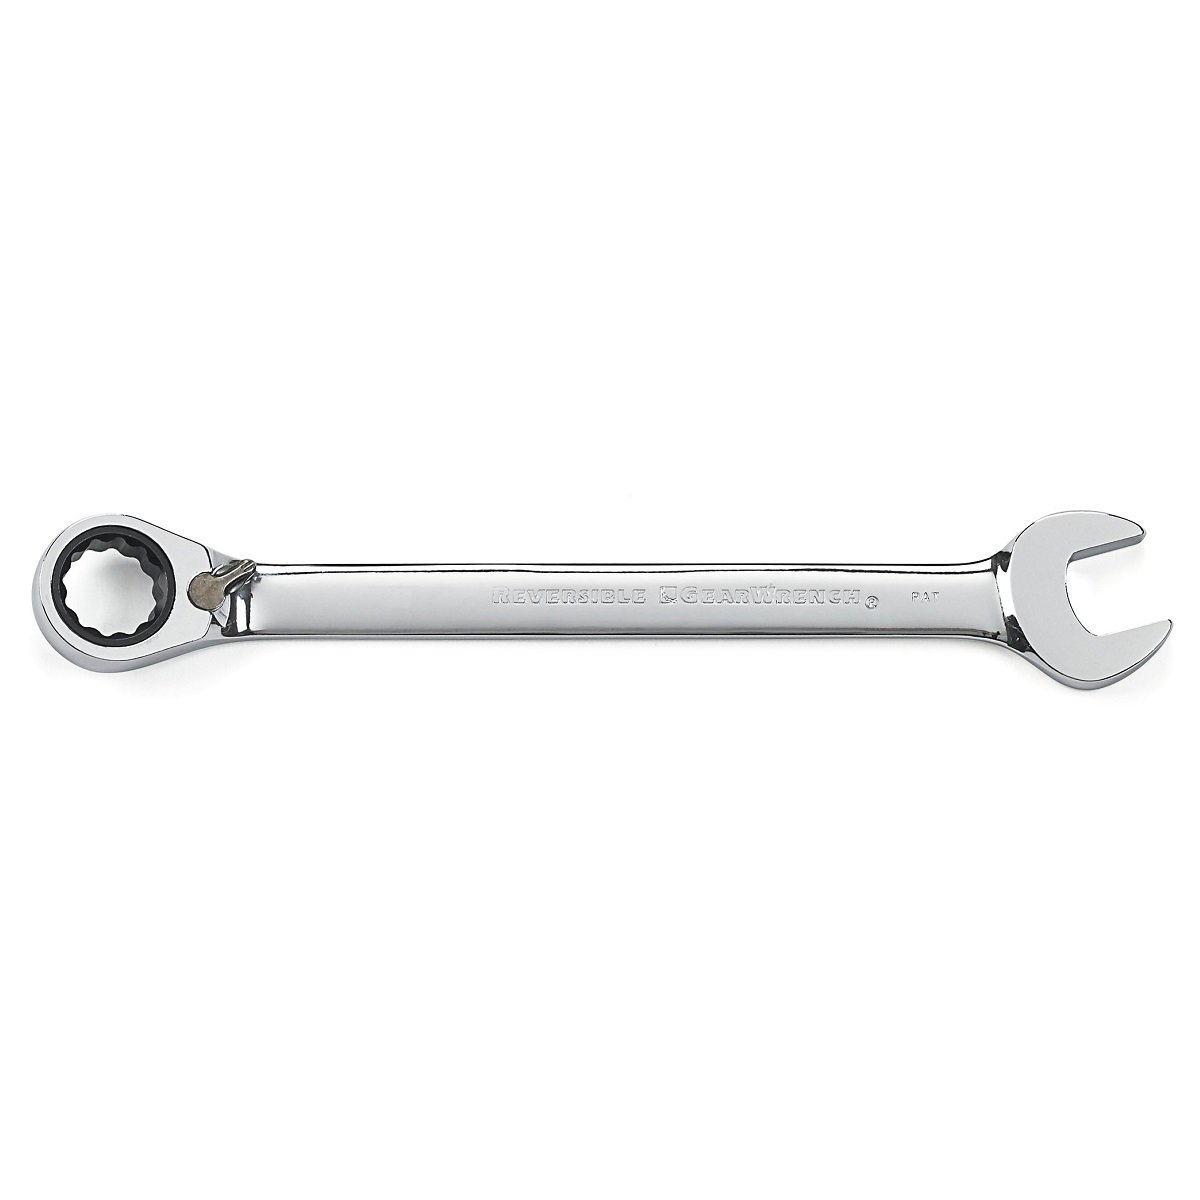 GearWrench 16mm Reversible Combination Ratcheting Wrench Spanner 9616N